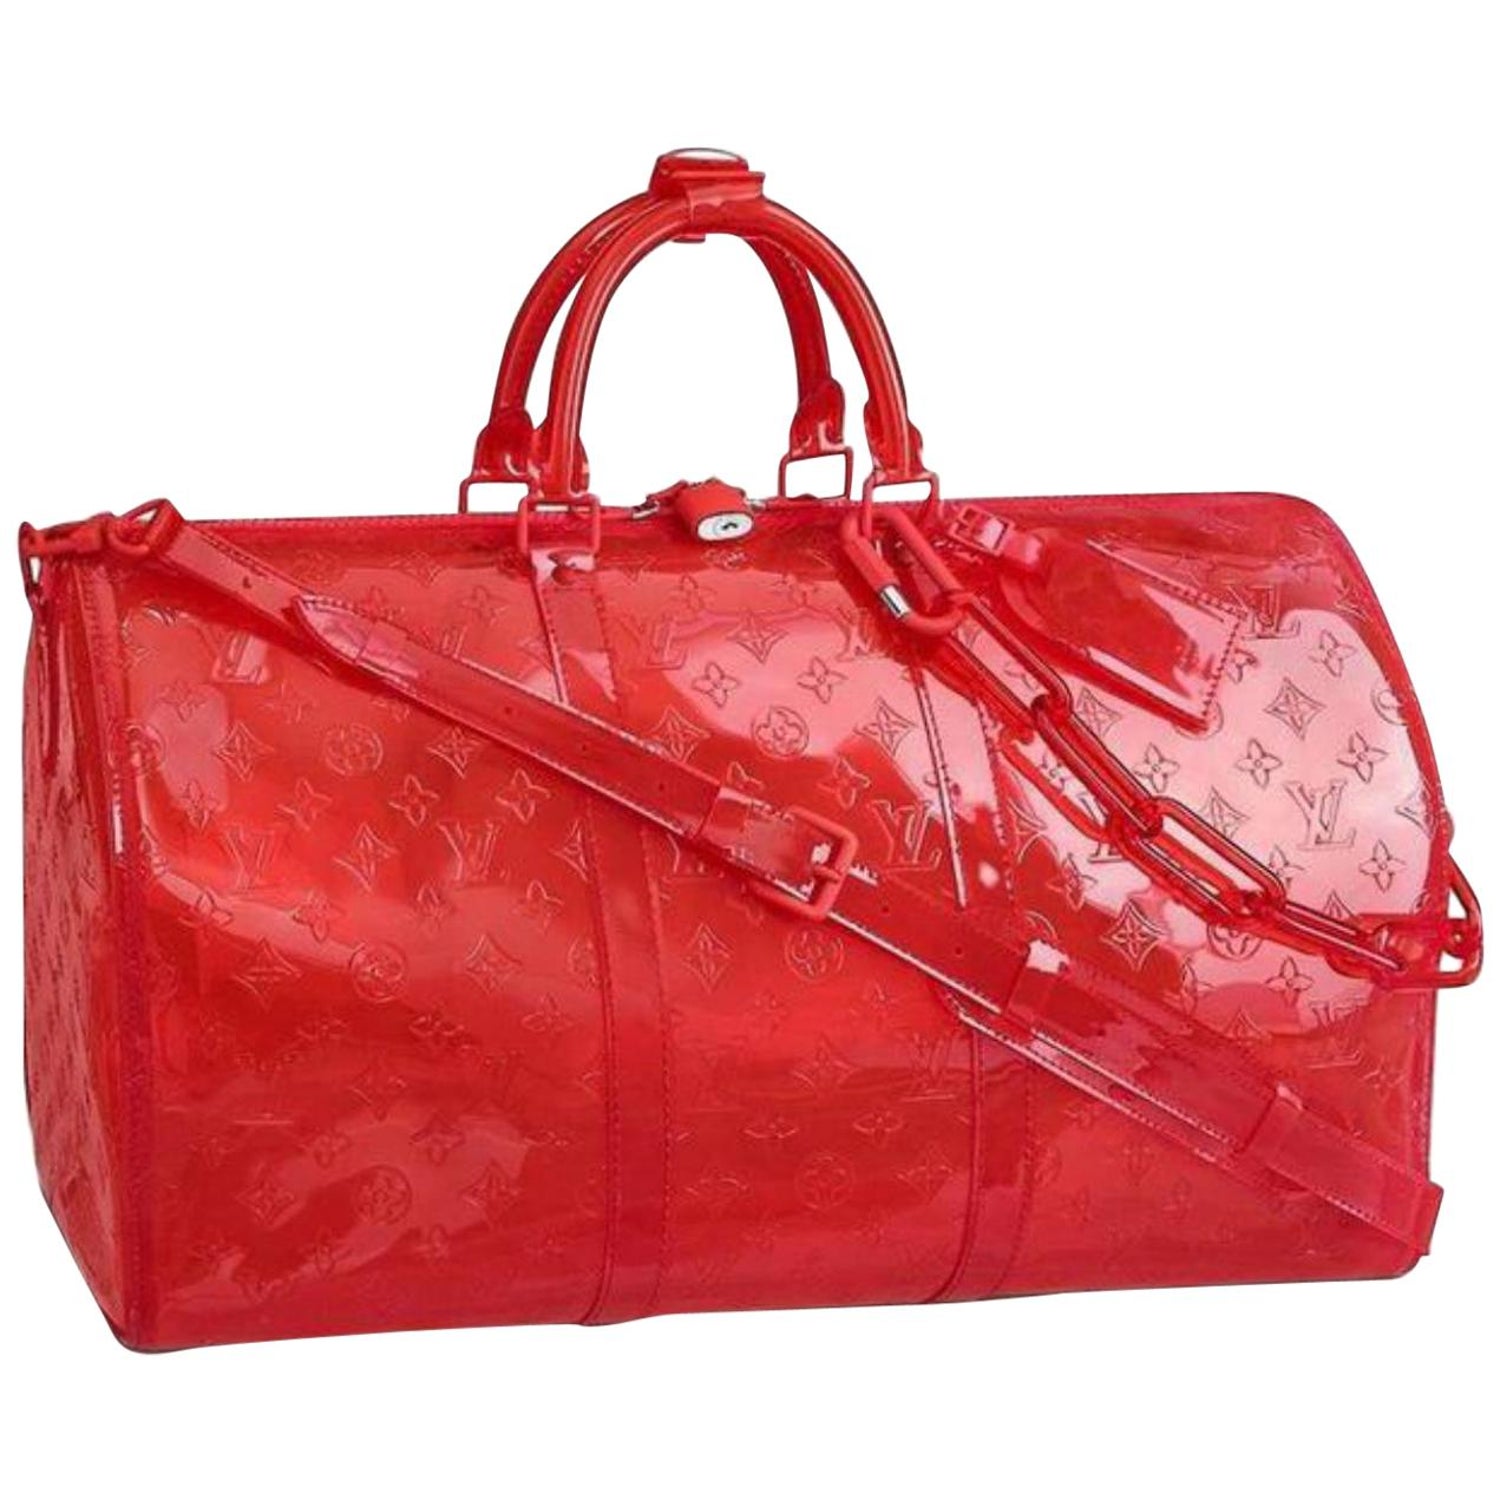 20 New LV/Louis Vuitton KEEPALL50 Transparent Colorful Travel Bag